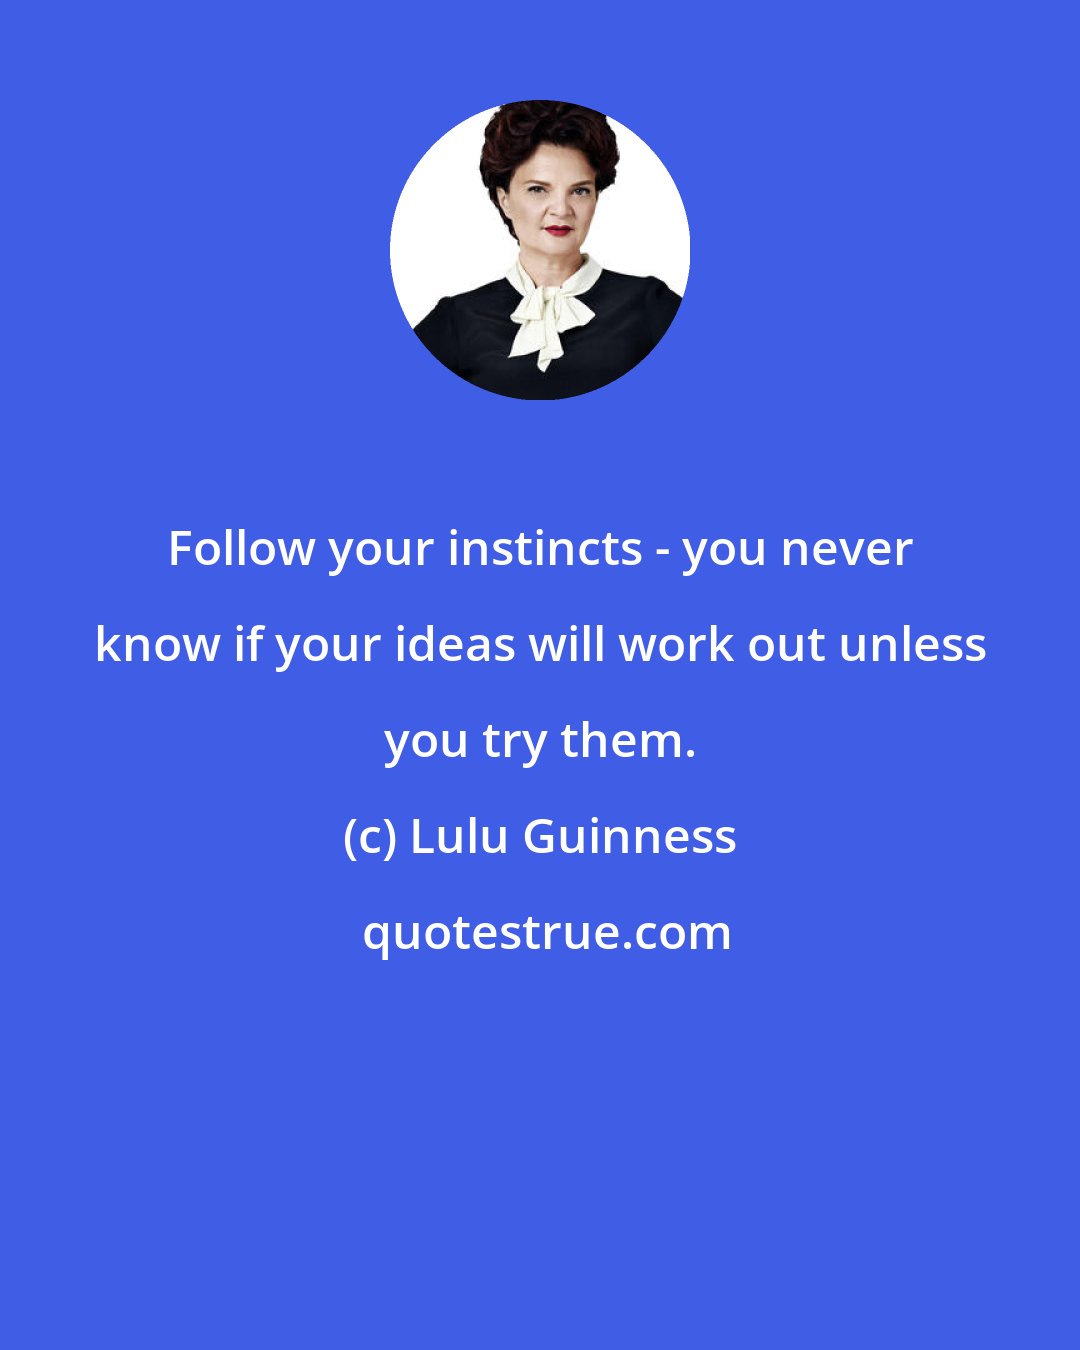 Lulu Guinness: Follow your instincts - you never know if your ideas will work out unless you try them.